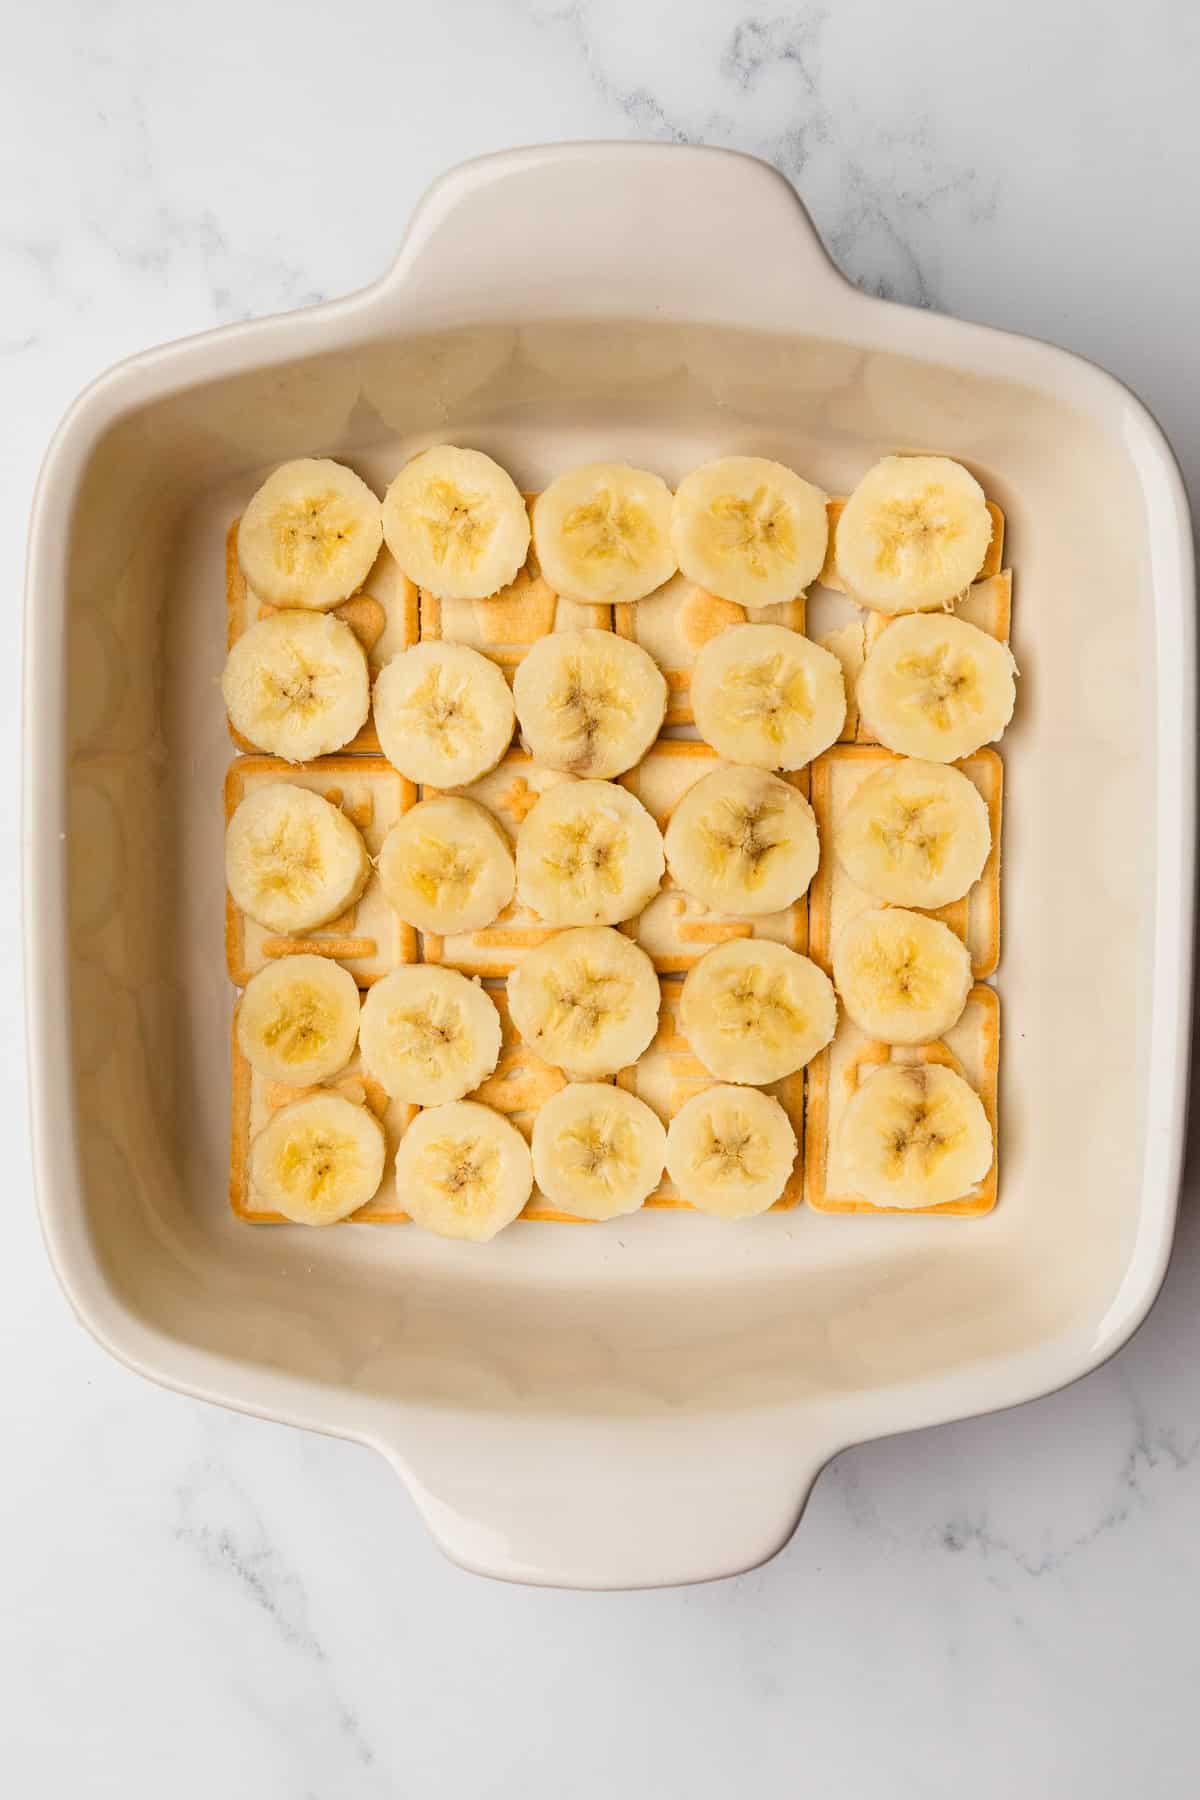 A layer of sliced bananas atop a layer of cookies.